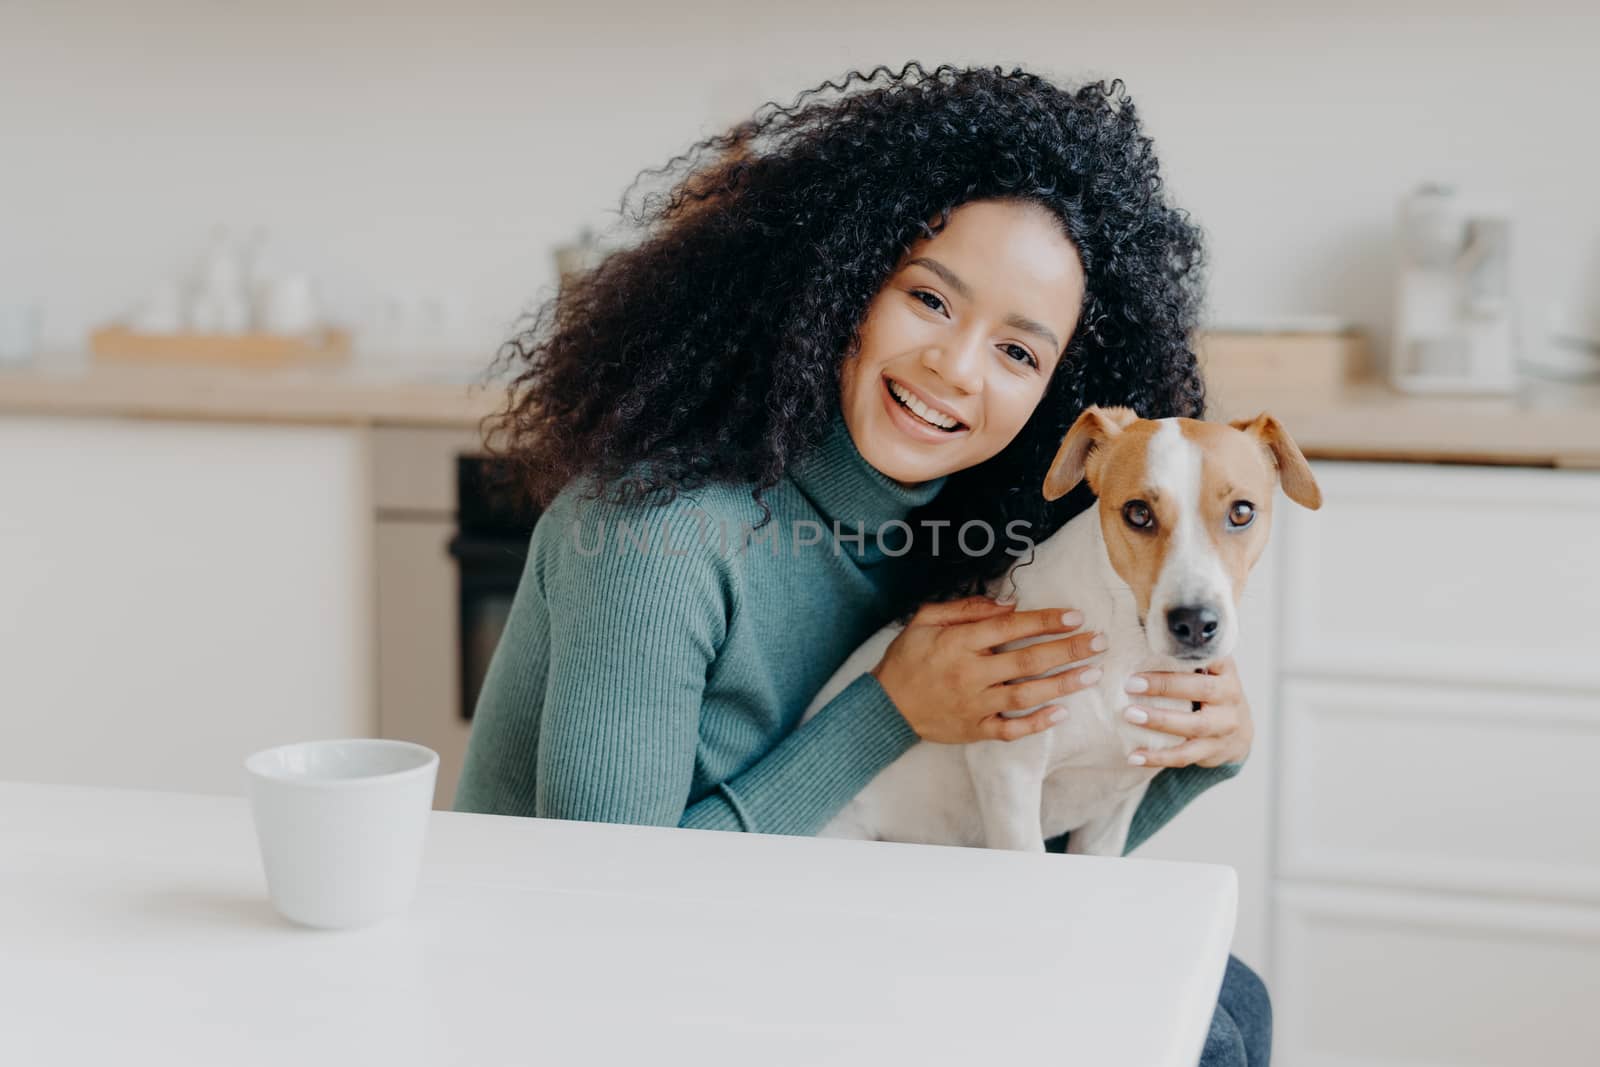 Adorable smiling woman embraces her favourite dog, expresses care and love, good attitiude to pet, poses against kitchen interior, drinks aromatic beverage. People, animals, relationship, affection by vkstock